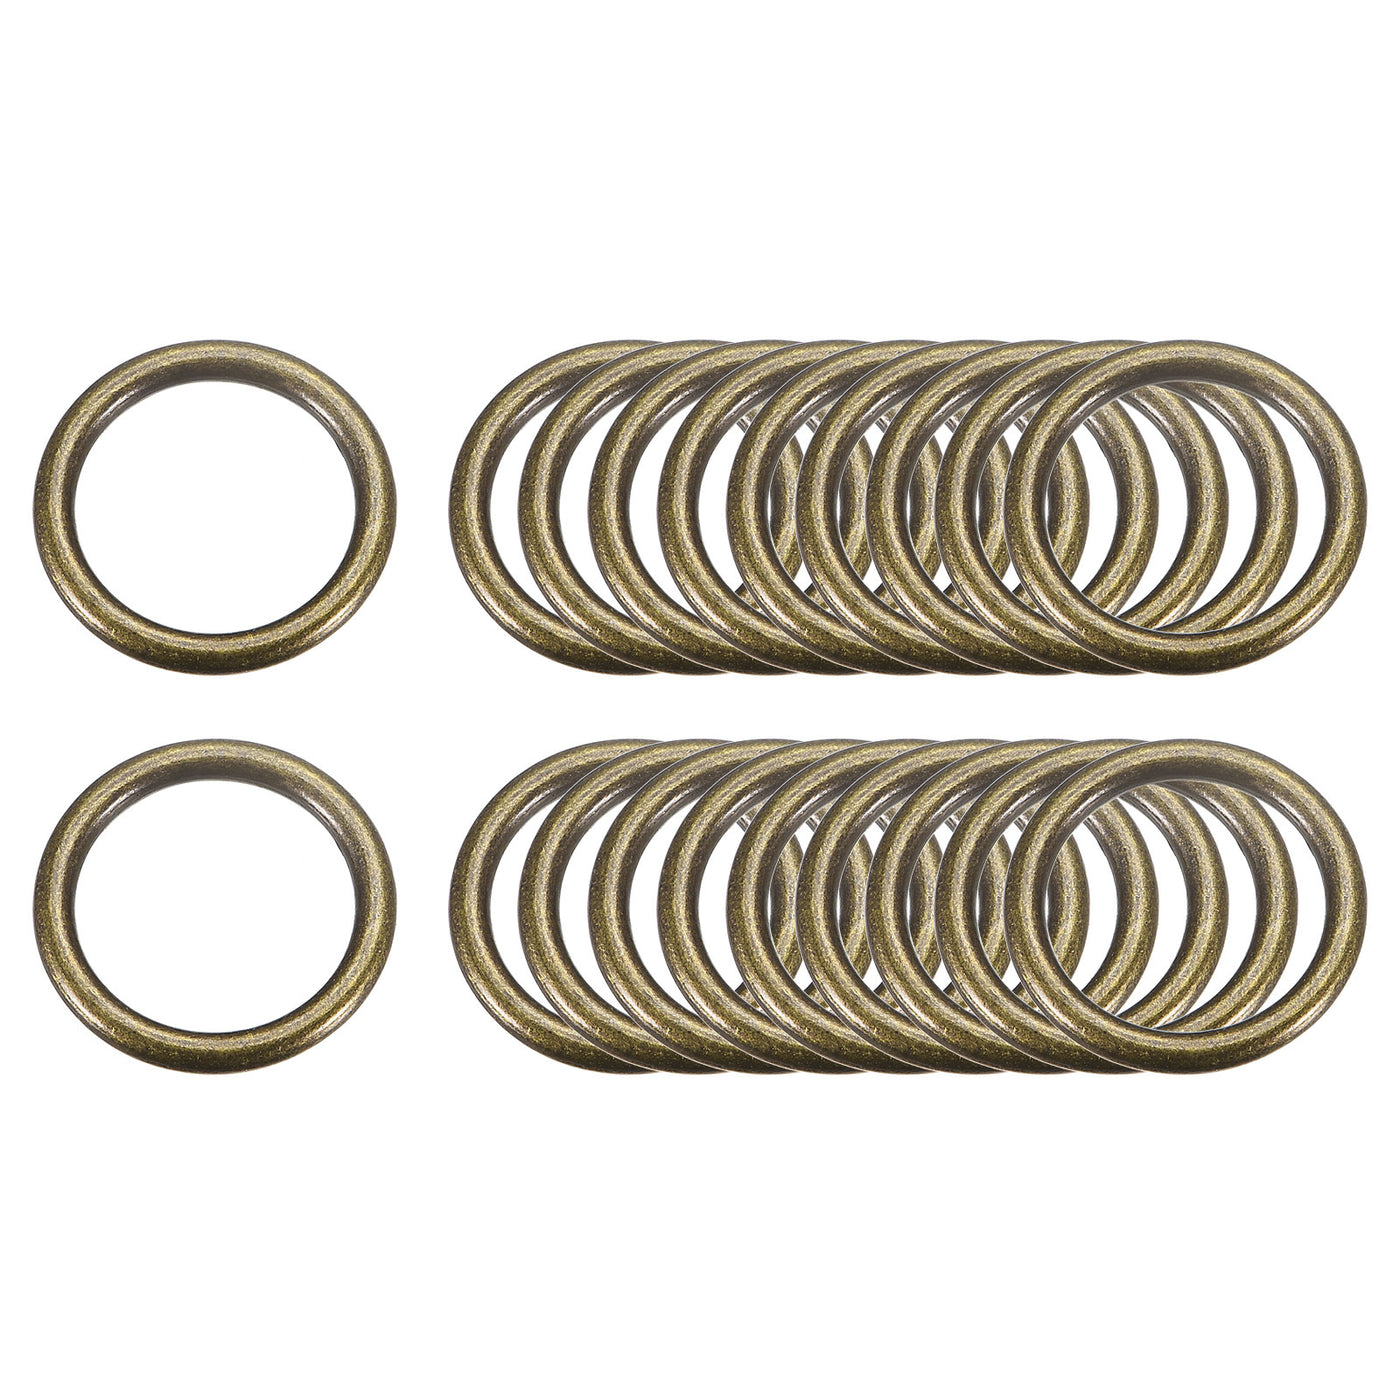 uxcell Uxcell Metal O Rings, 20pcs 20mm(0.79") ID 3mm Thick Welded O-Ringe, Bronze Tone